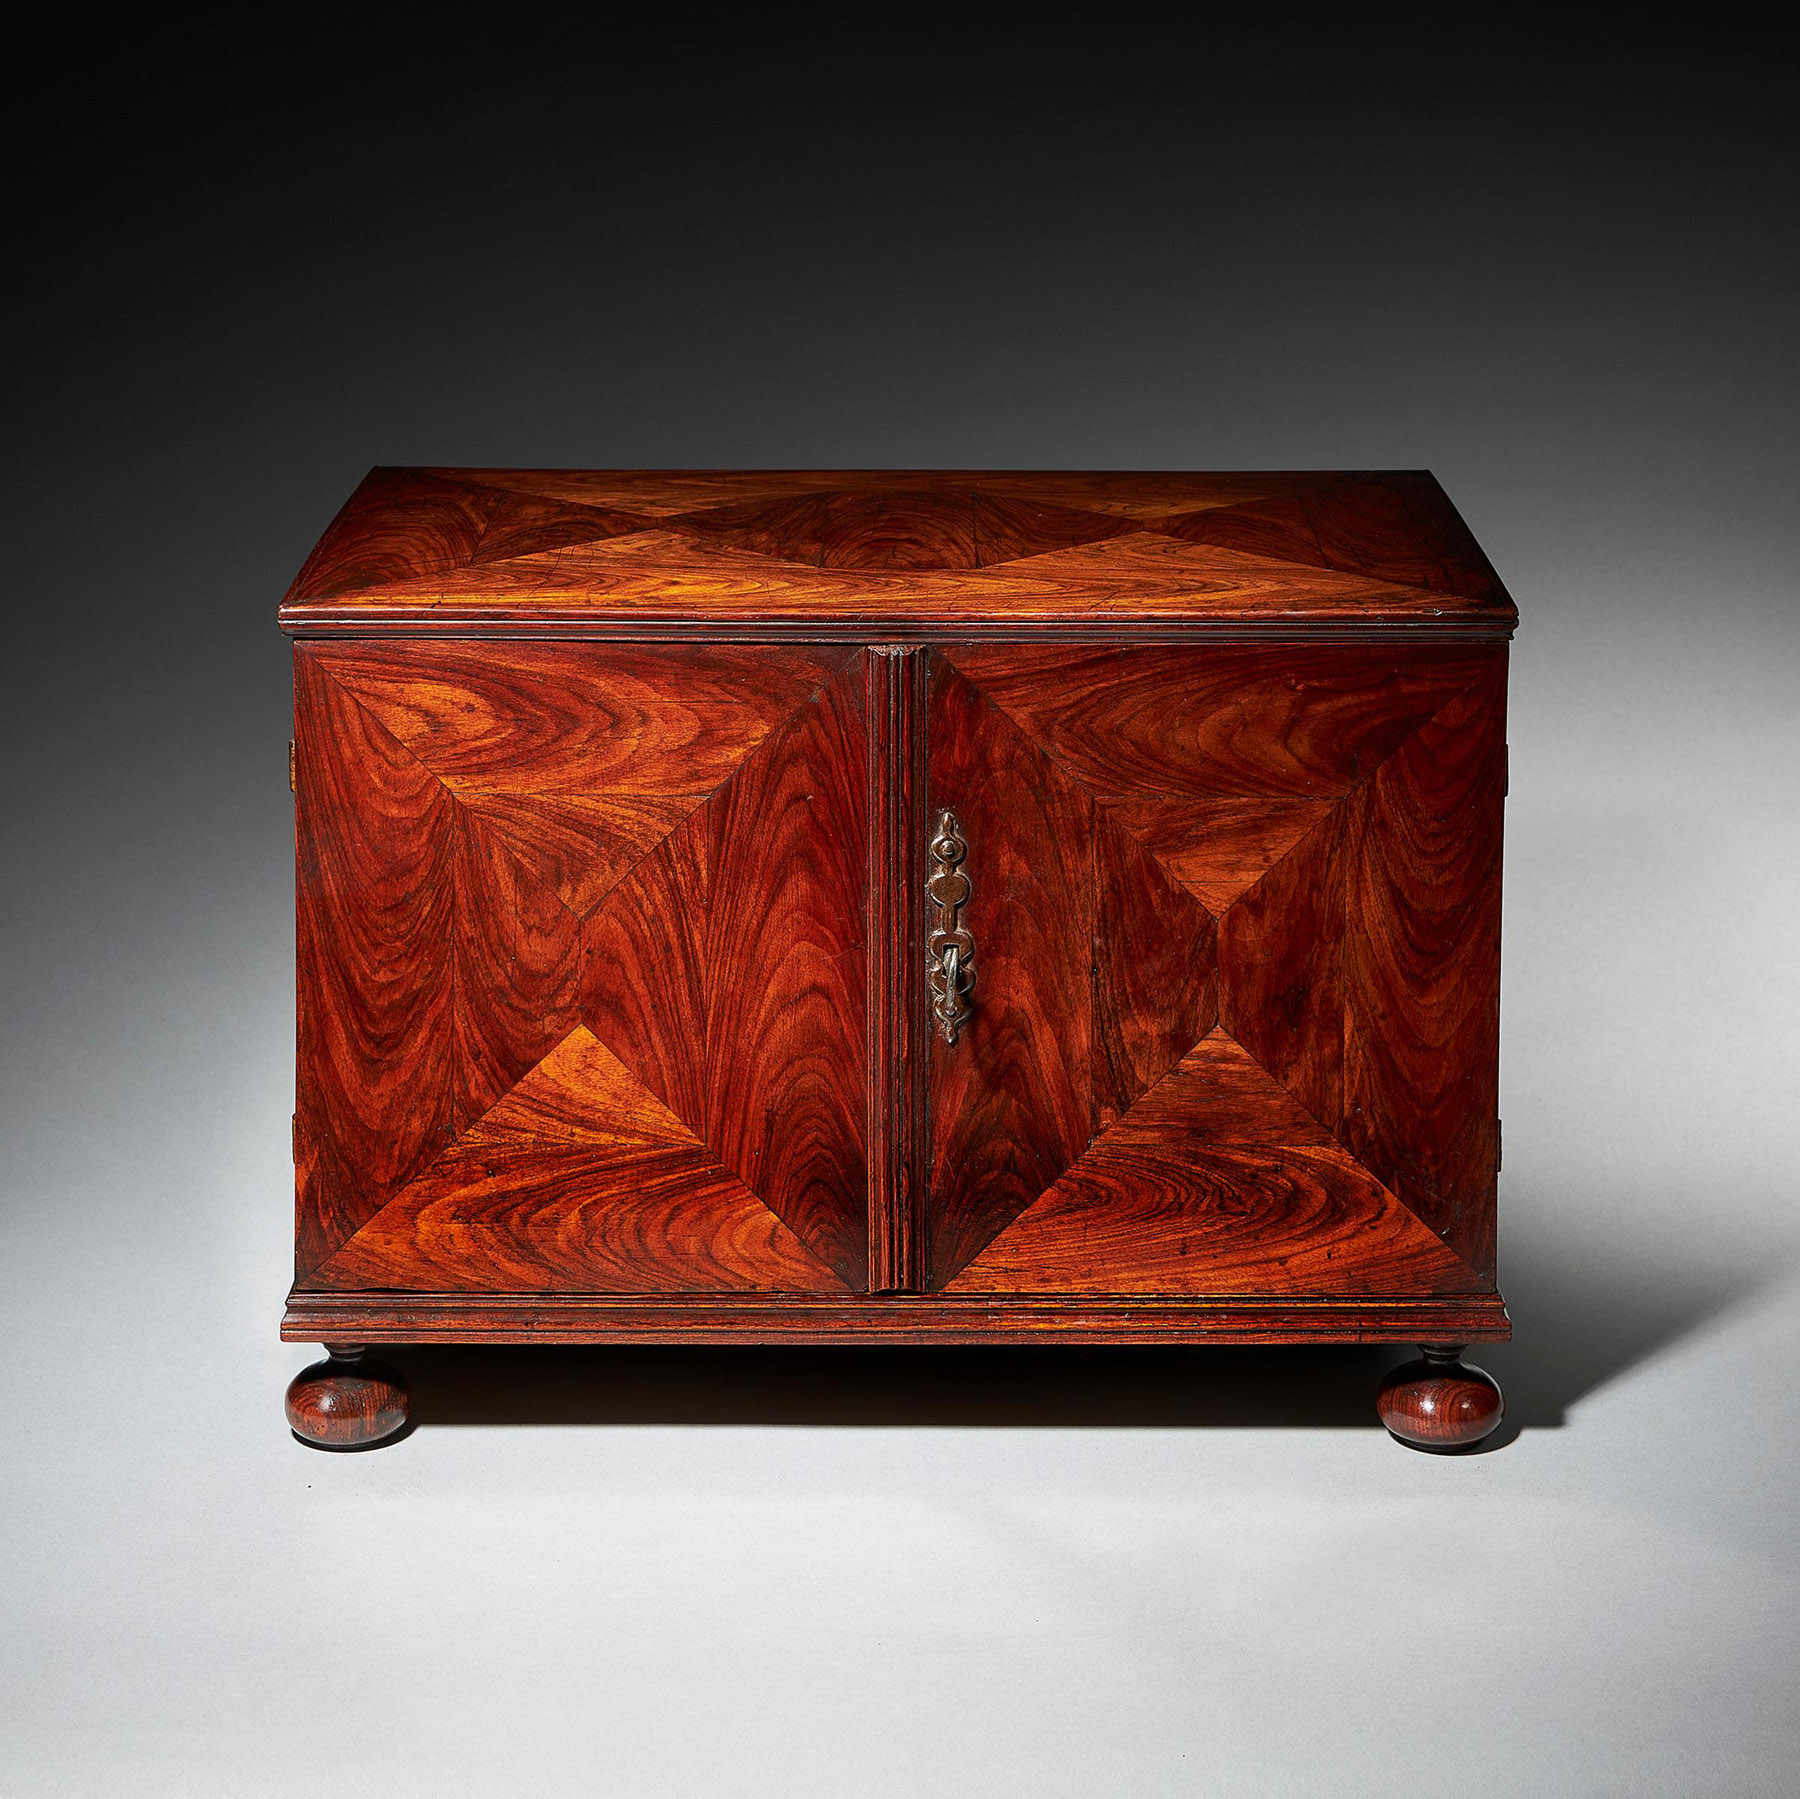 Extremely Rare and Fine Miniature Kingwood Table Cabinet from the Reign of Charles II 2